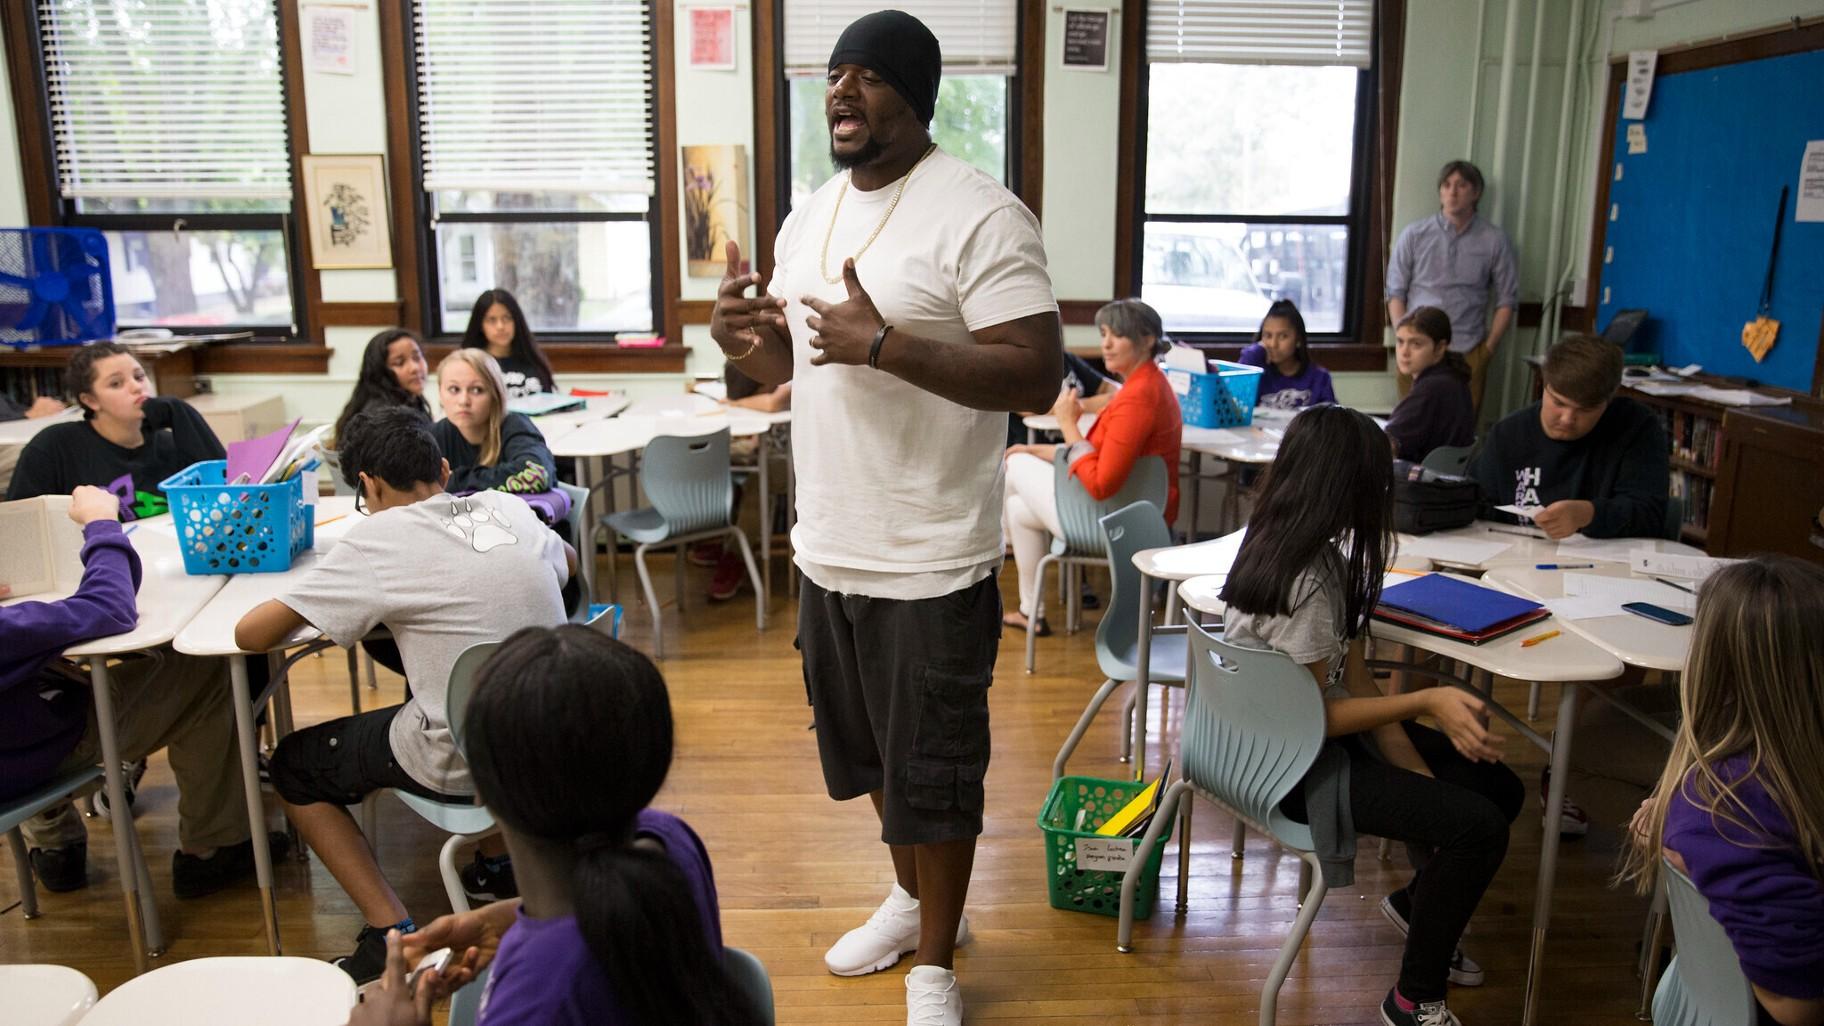 In this image provided by the Des Moines Public Schools, community activist and rap artist Will Keeps works with students at Harding Middle School on Sept. 27, 2017, in Des Moines, Iowa. (Jon Lemons / Des Moines Public Schools via AP)